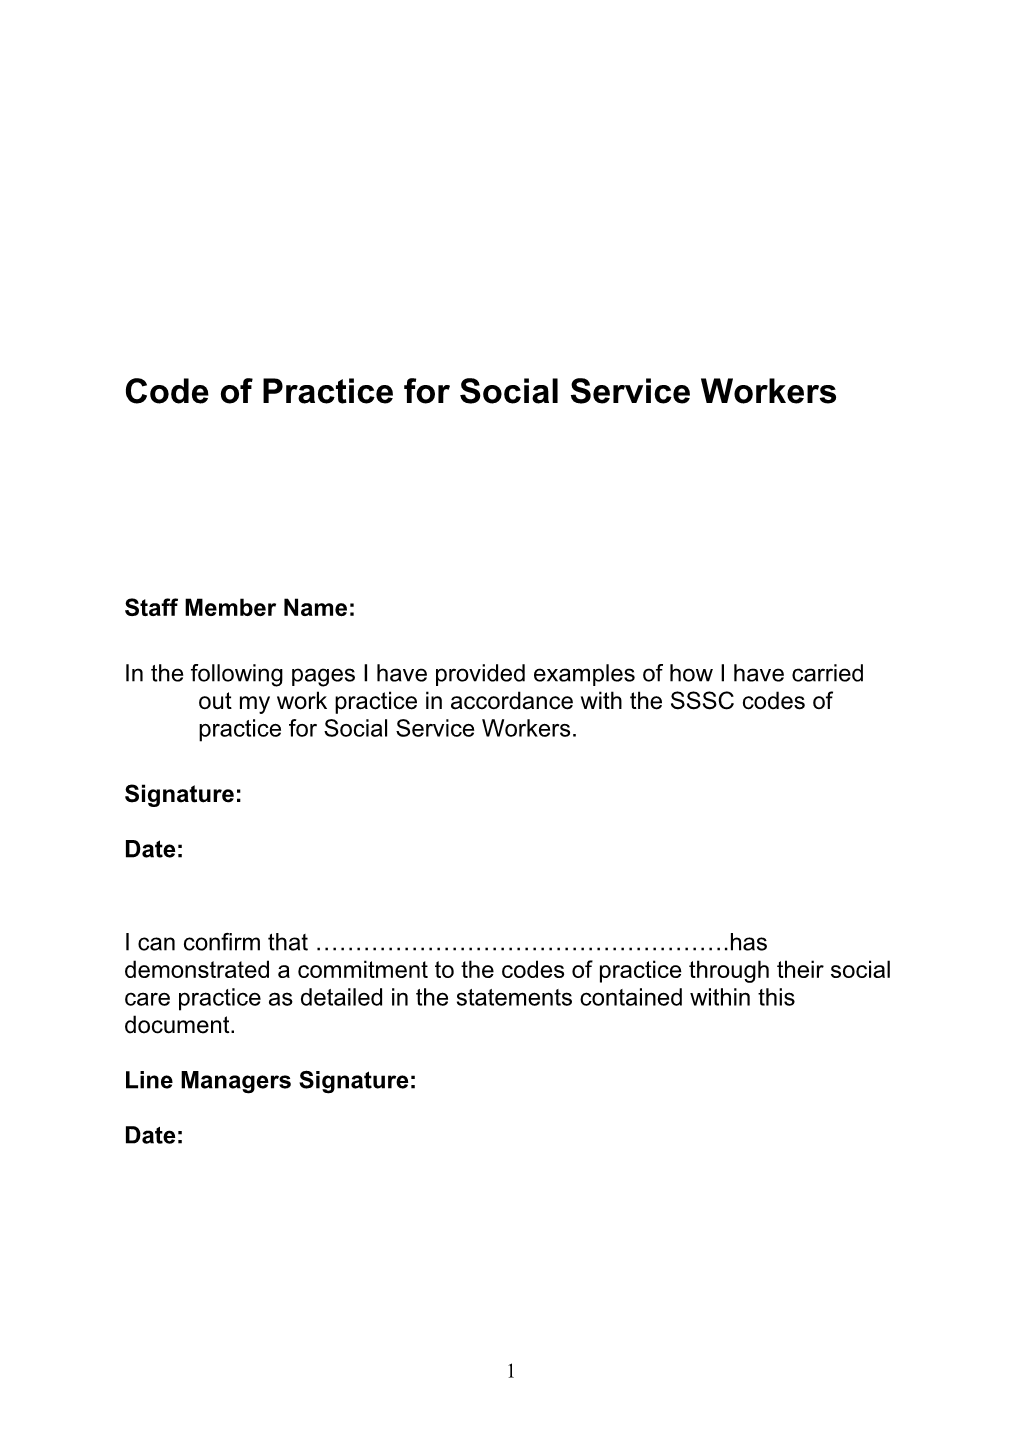 Code of Practice for Social Service Workers